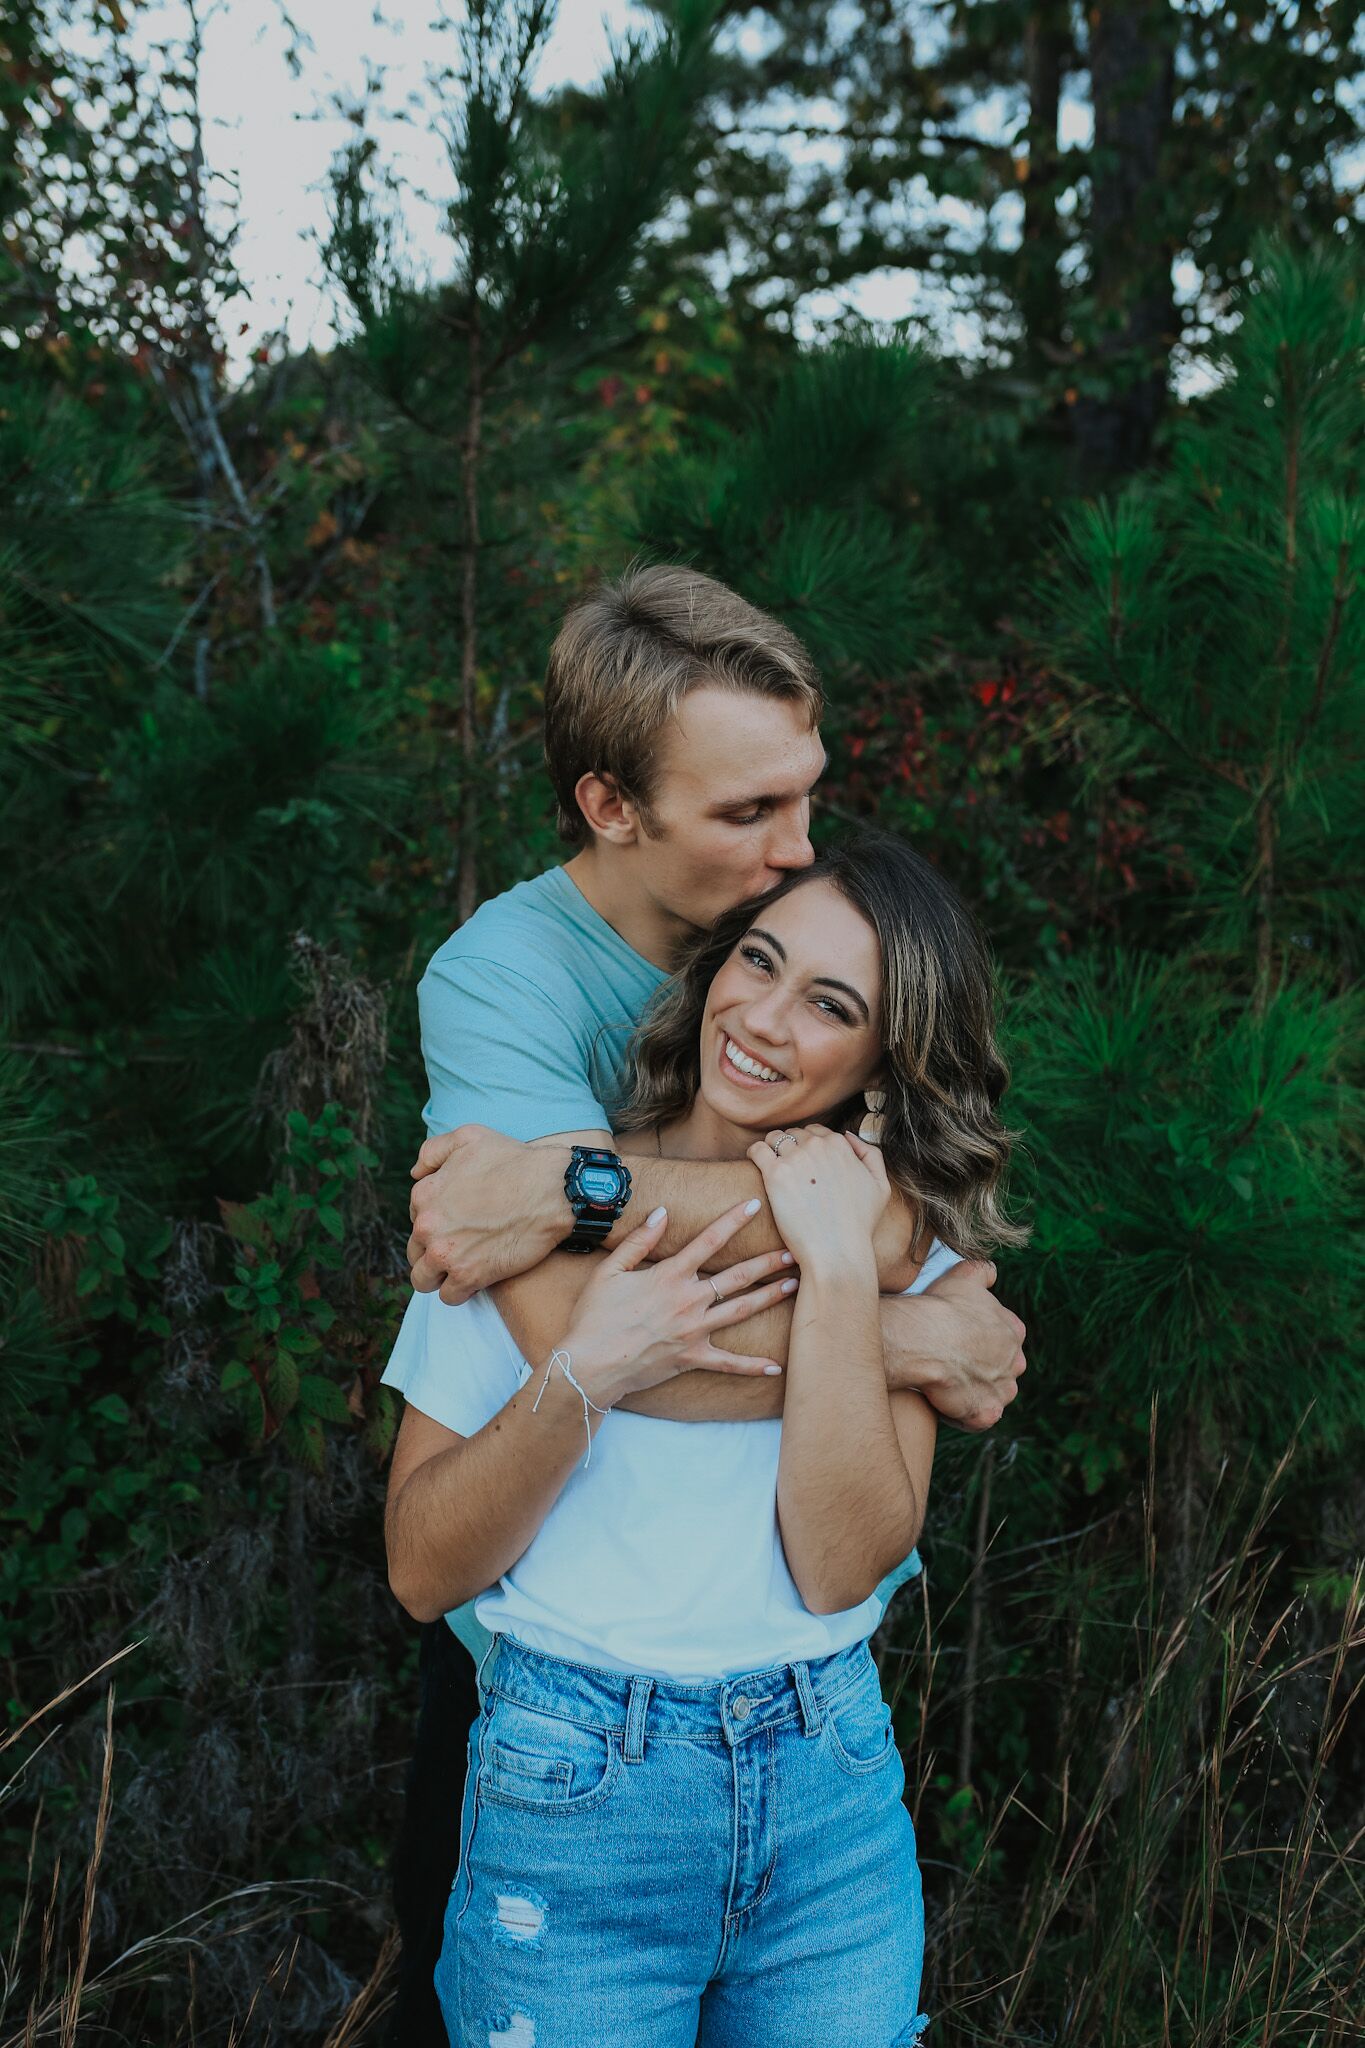 Logan Venable and Danielle Sess's Wedding Website - The Knot